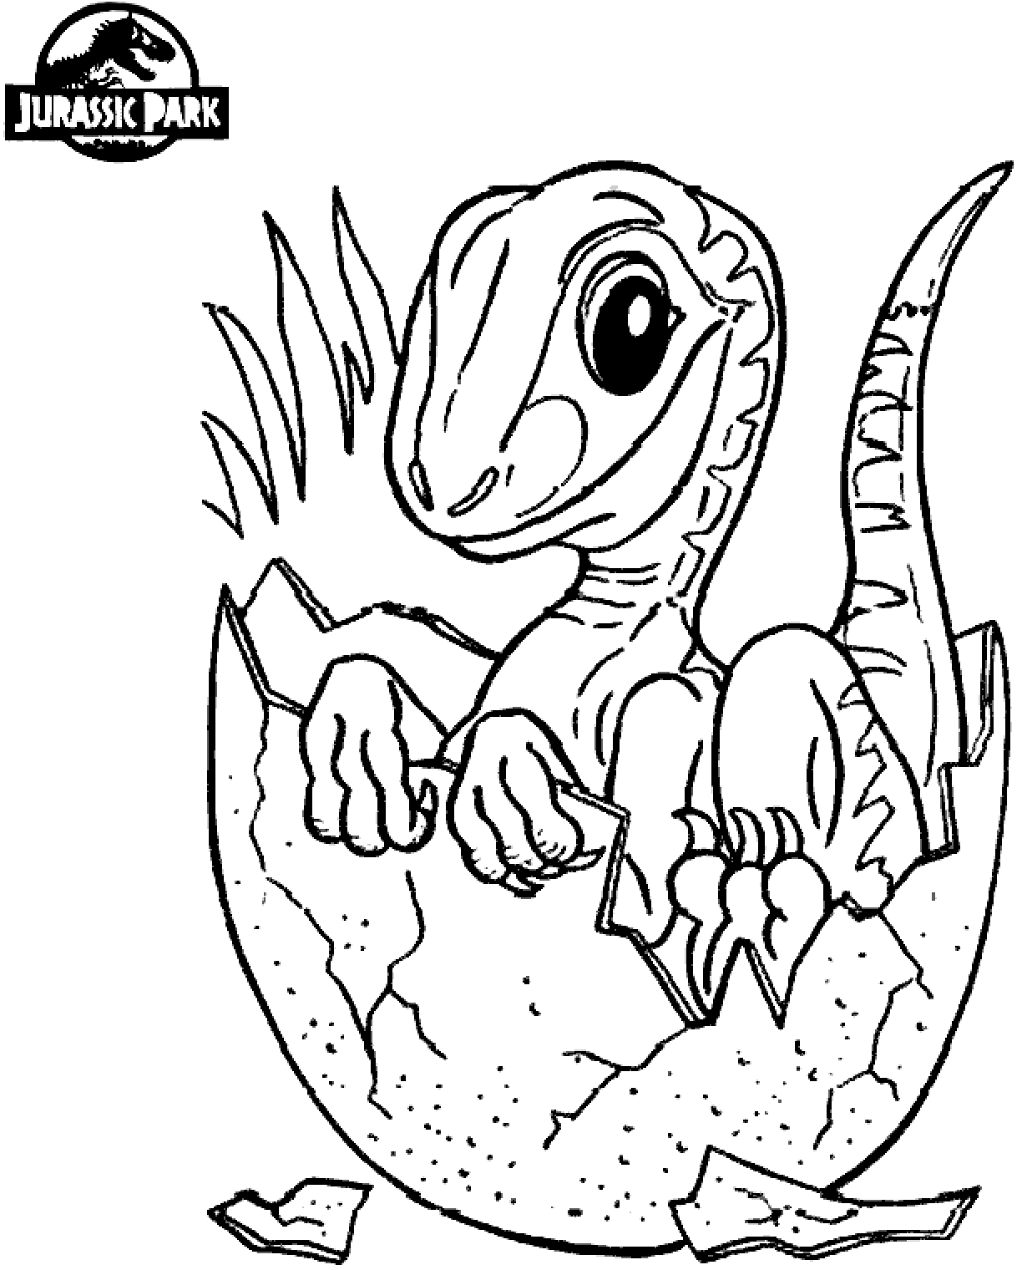 Baby Dinosaur In Jurassic World Coloring Page - Free Printable Coloring